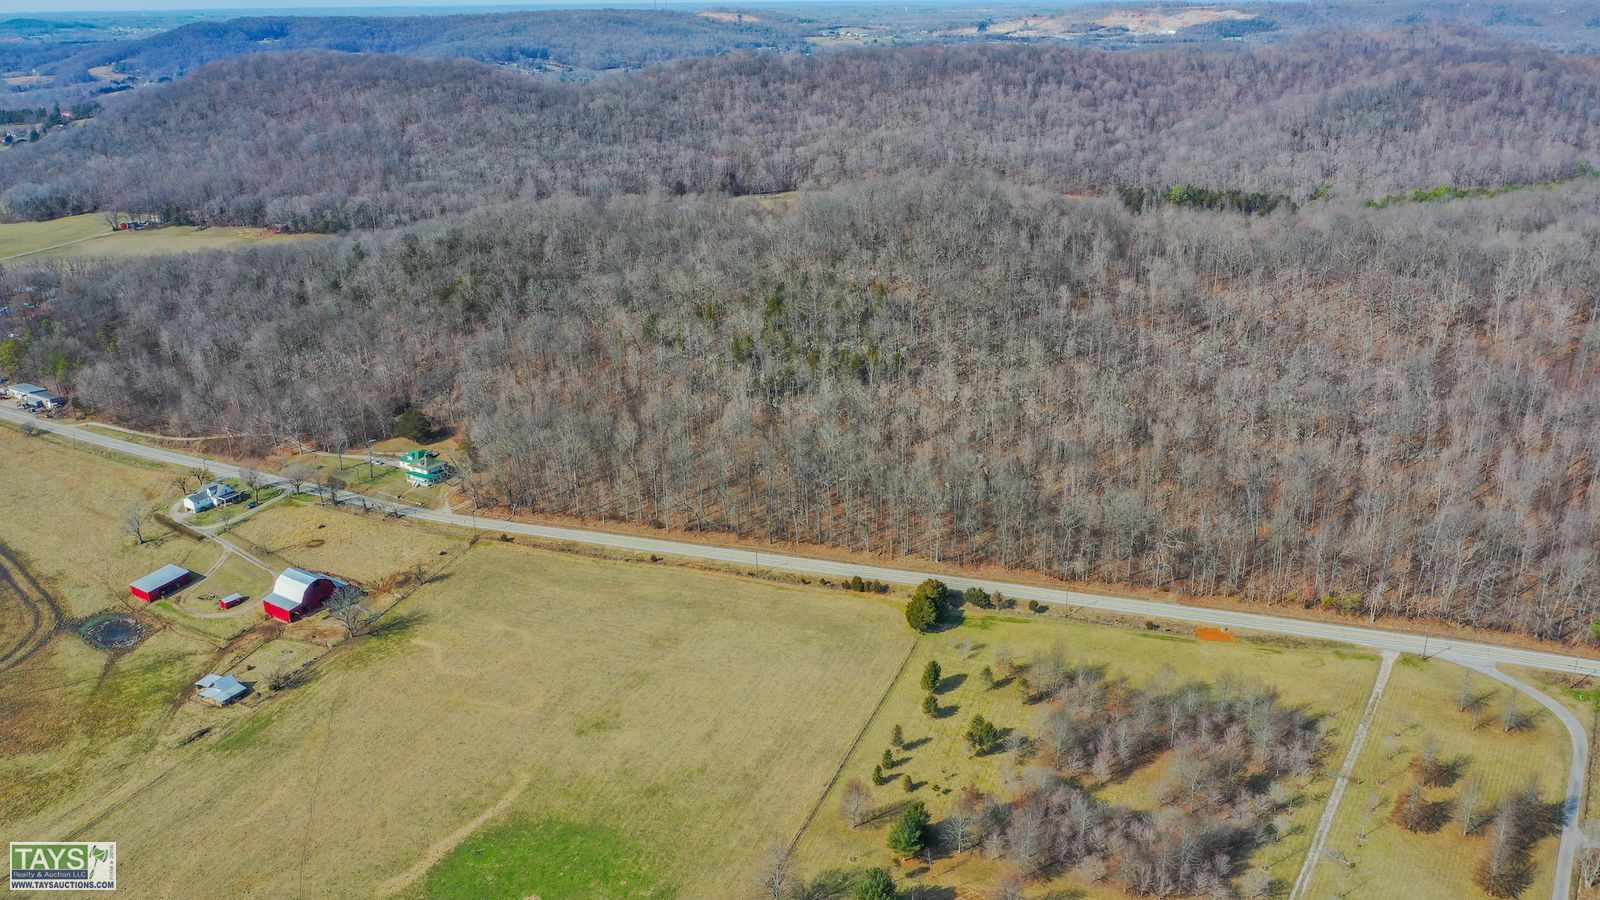 ONLINE ABSOLUTE AUCTION: 8.76 Ac± WOODED TRACT